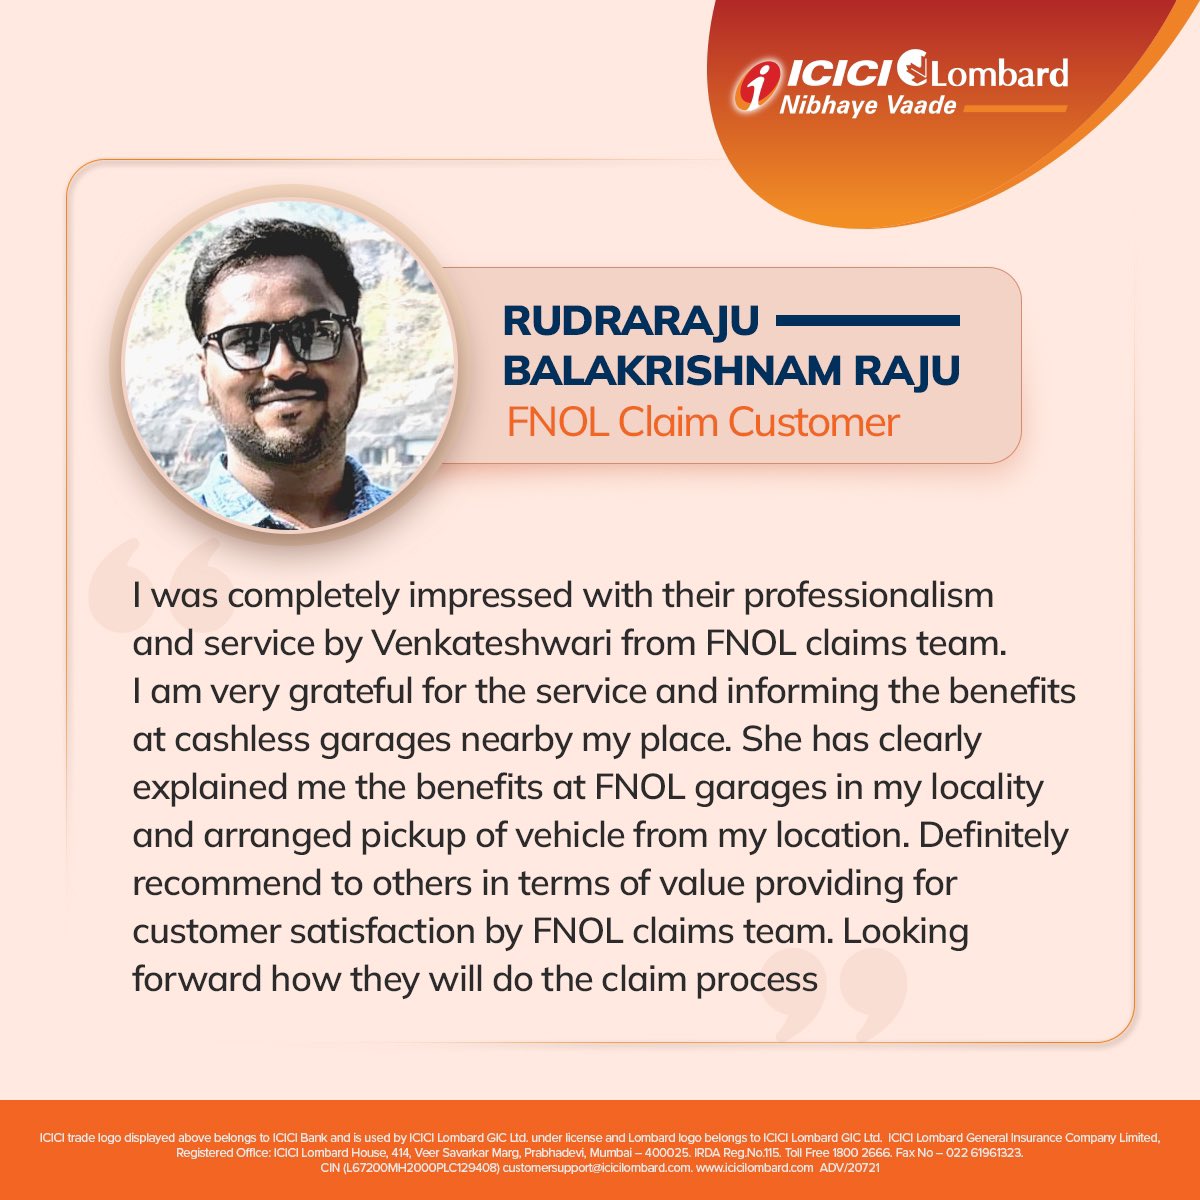 Empowering journeys with seamless support at every turn.

#NibhayeVaade #ICICILombard #Testimonial #CustomerSpotlight